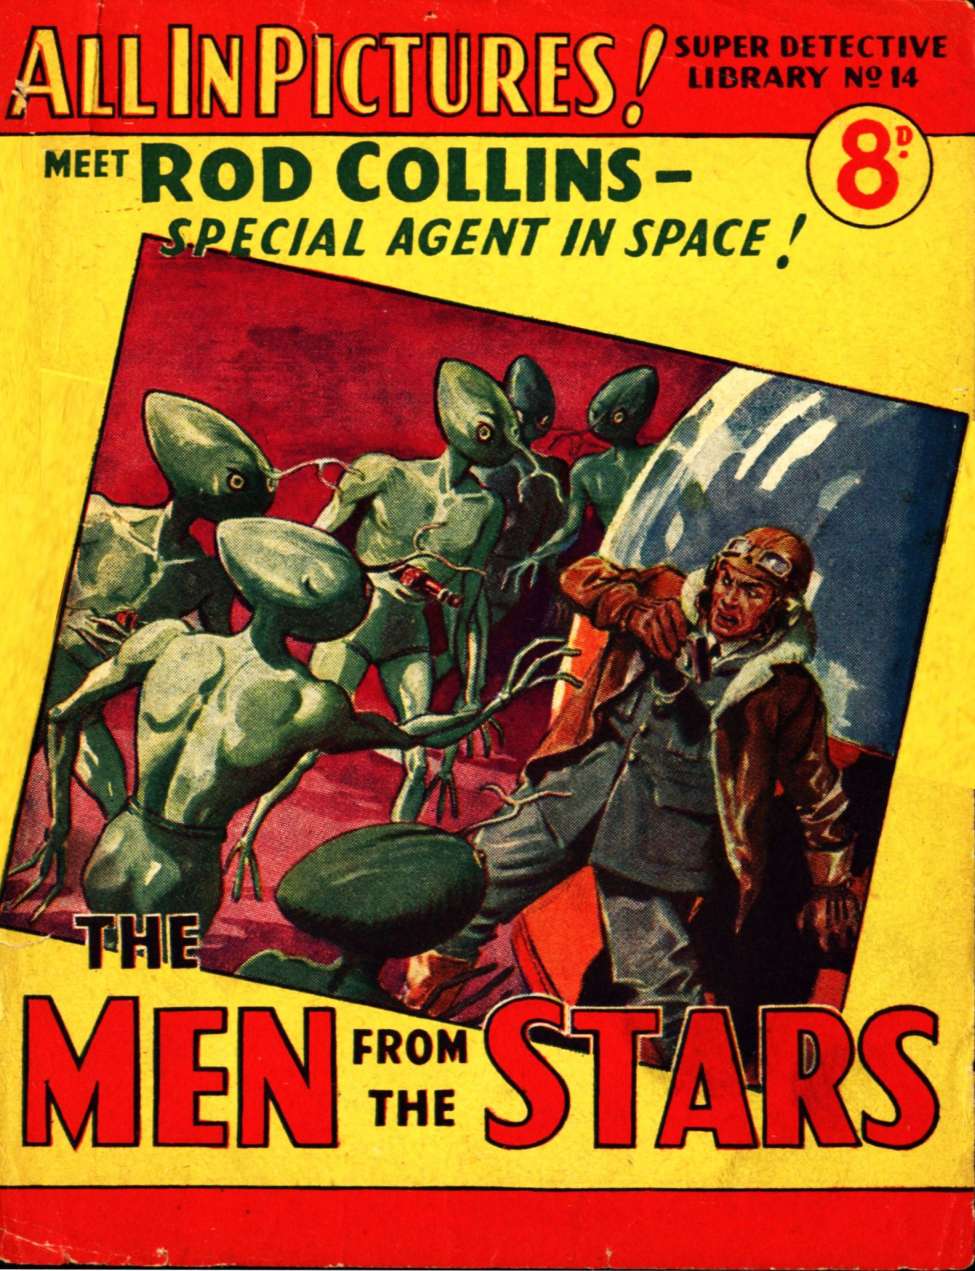 Book Cover For Super Detective Library 14 - Men From The Stars